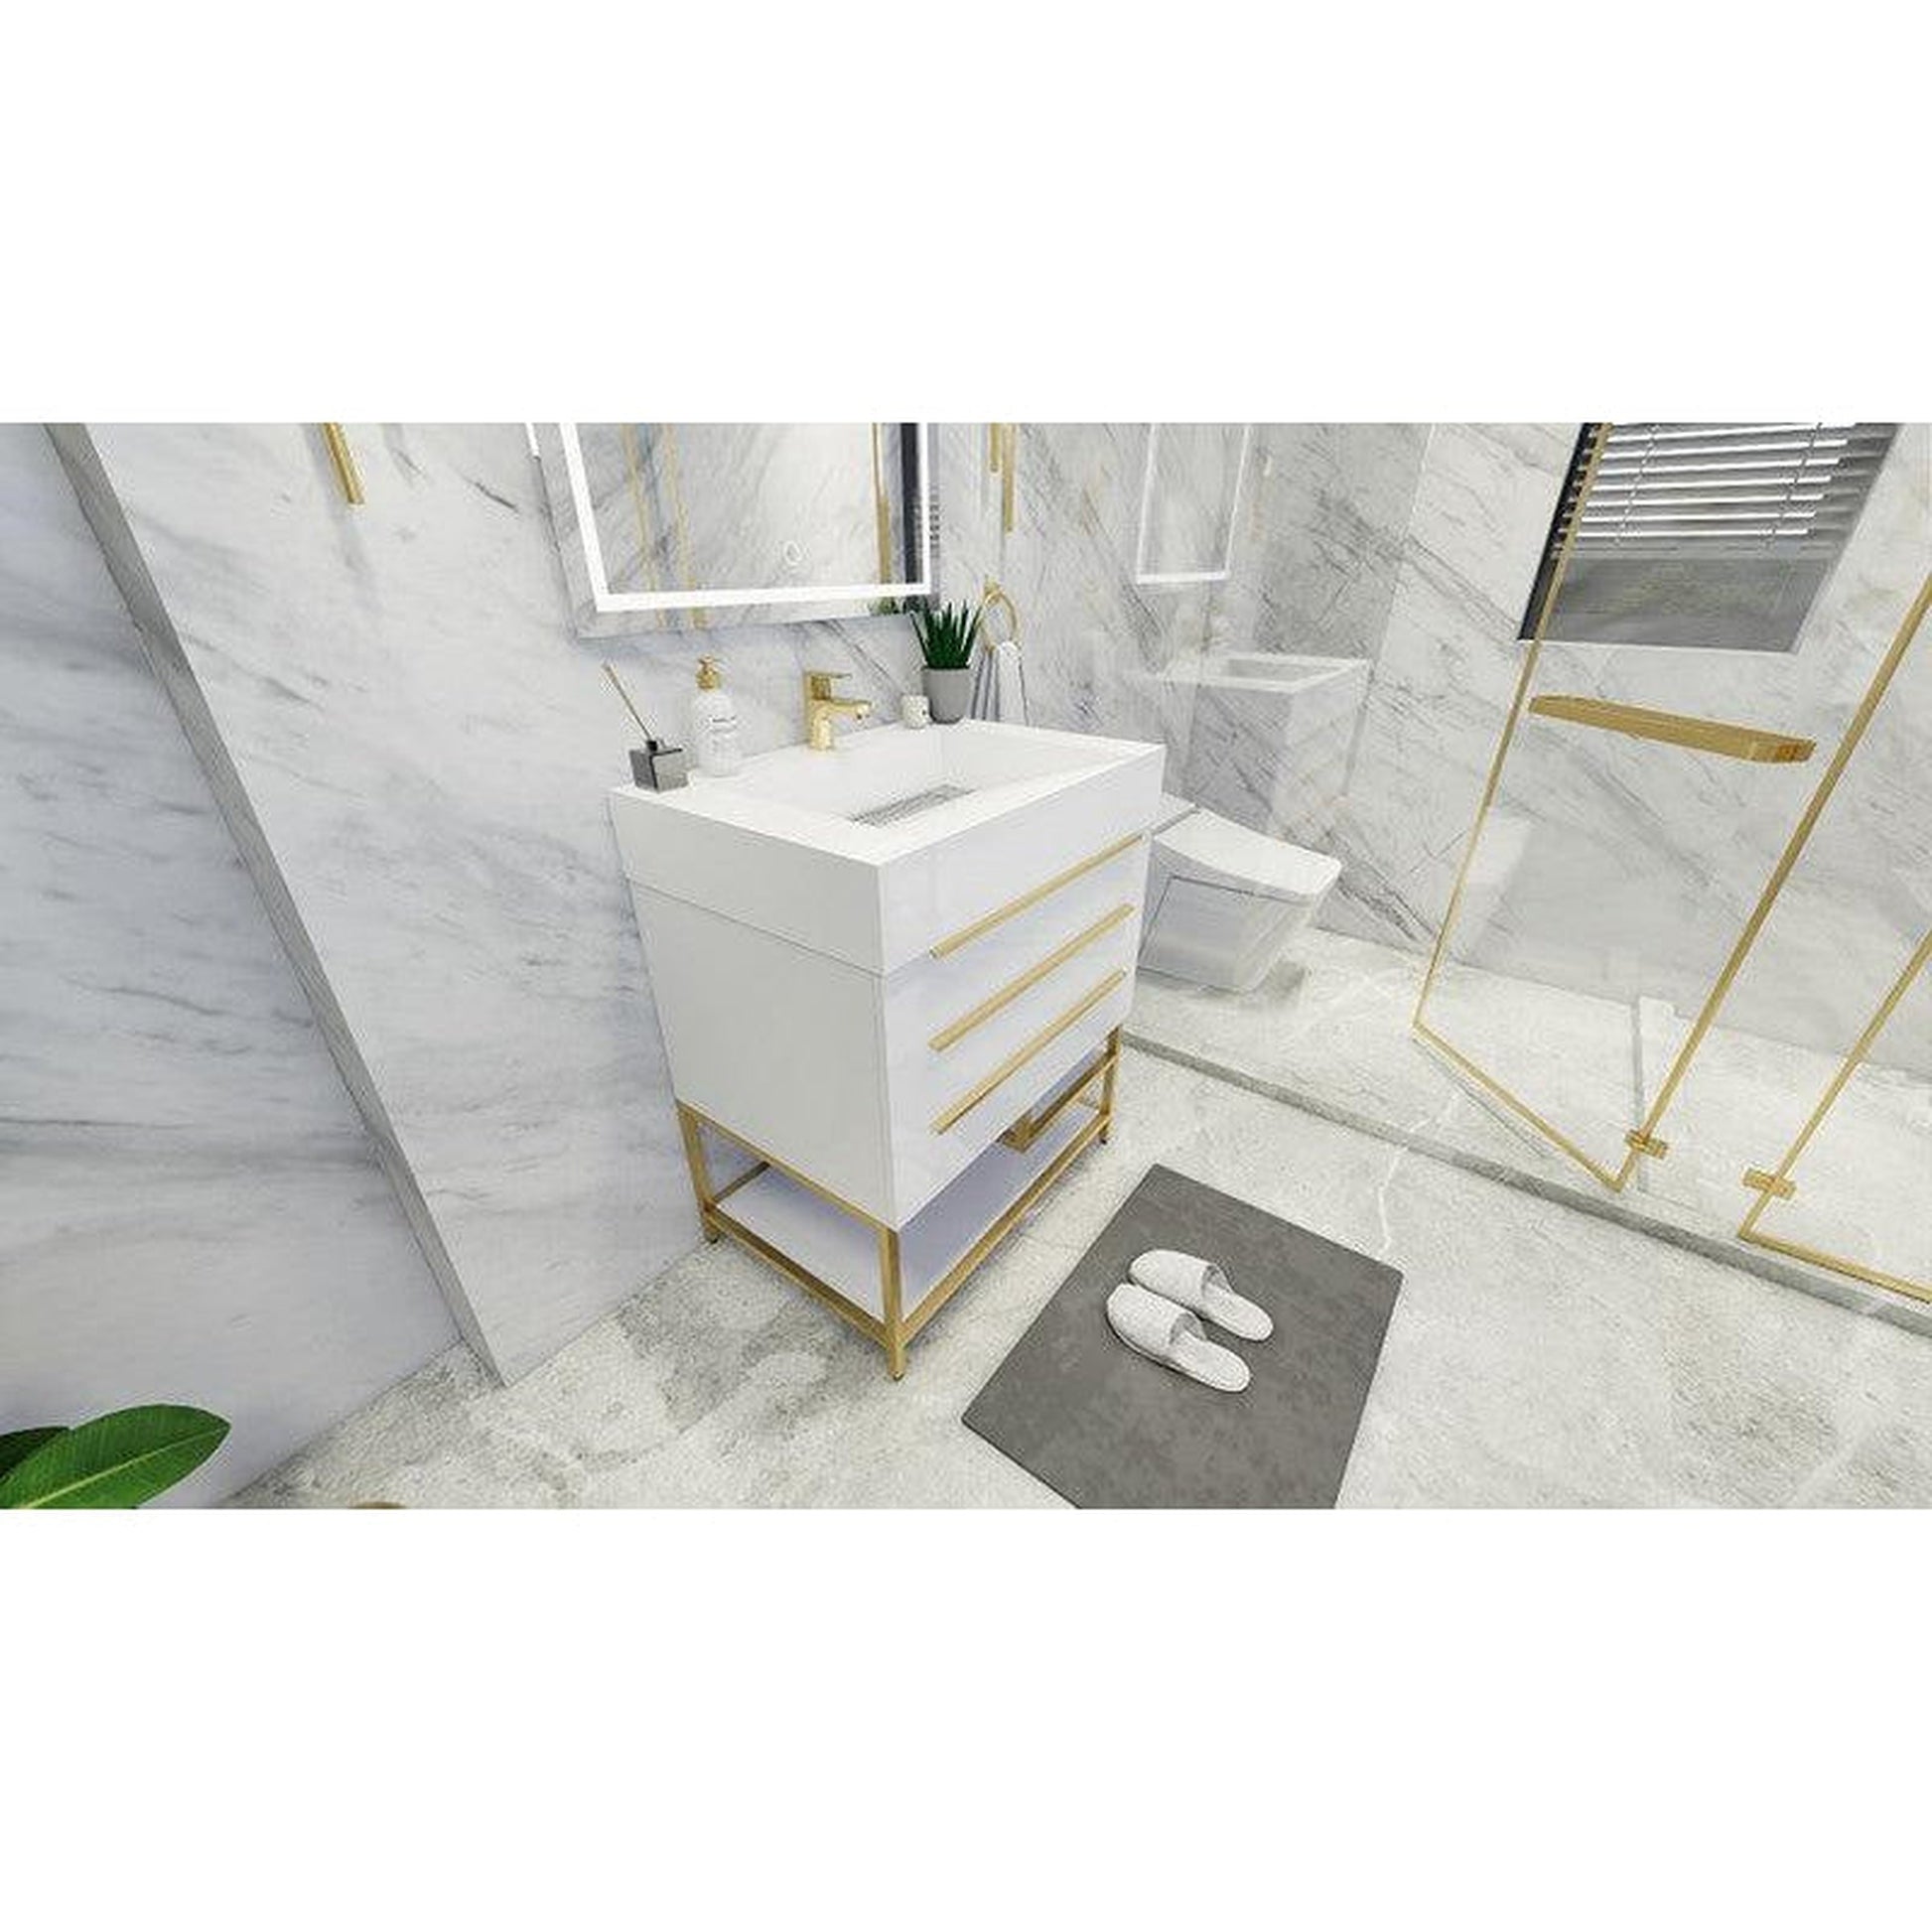 Moreno Bath Bethany 30" High Gloss White Freestanding Vanity With Single Reinforced White Acrylic Sink